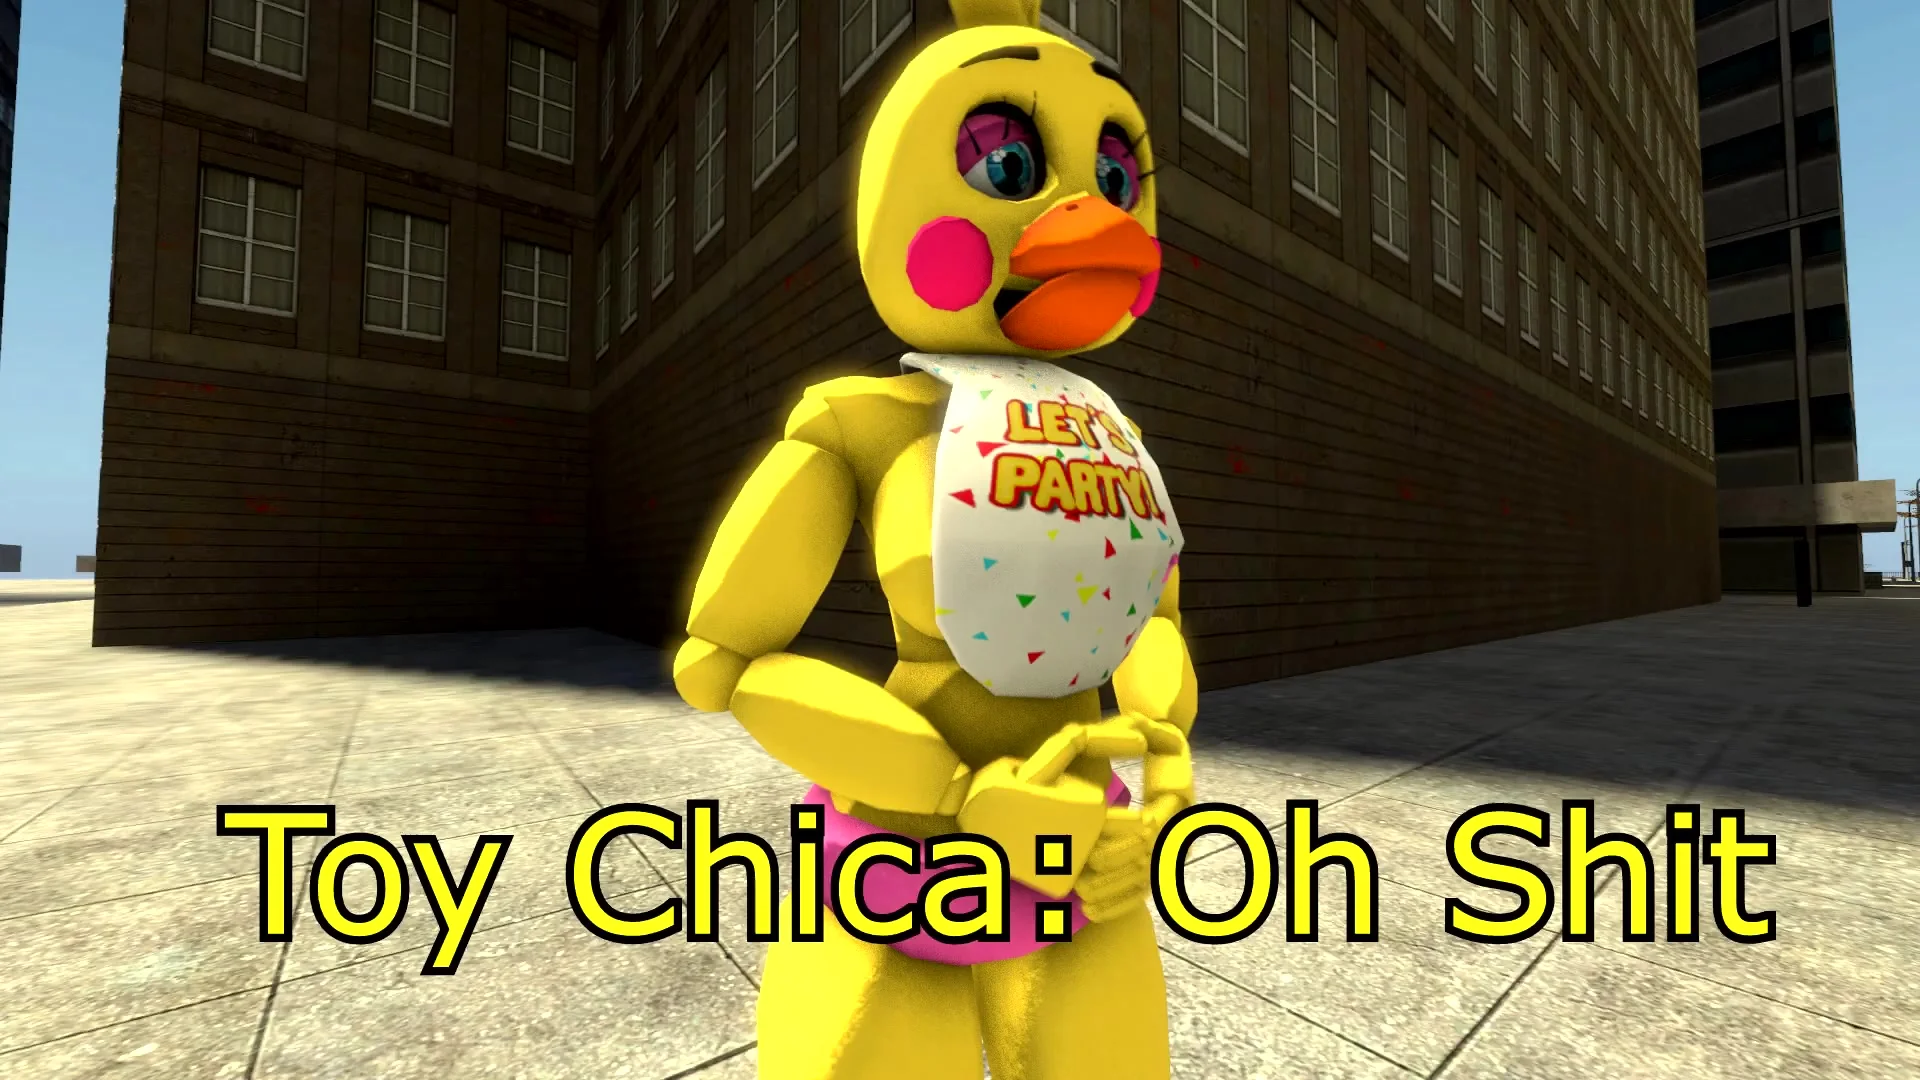 FNAF SFM Toy Chica pooping In A Bucked - ThisVid.com